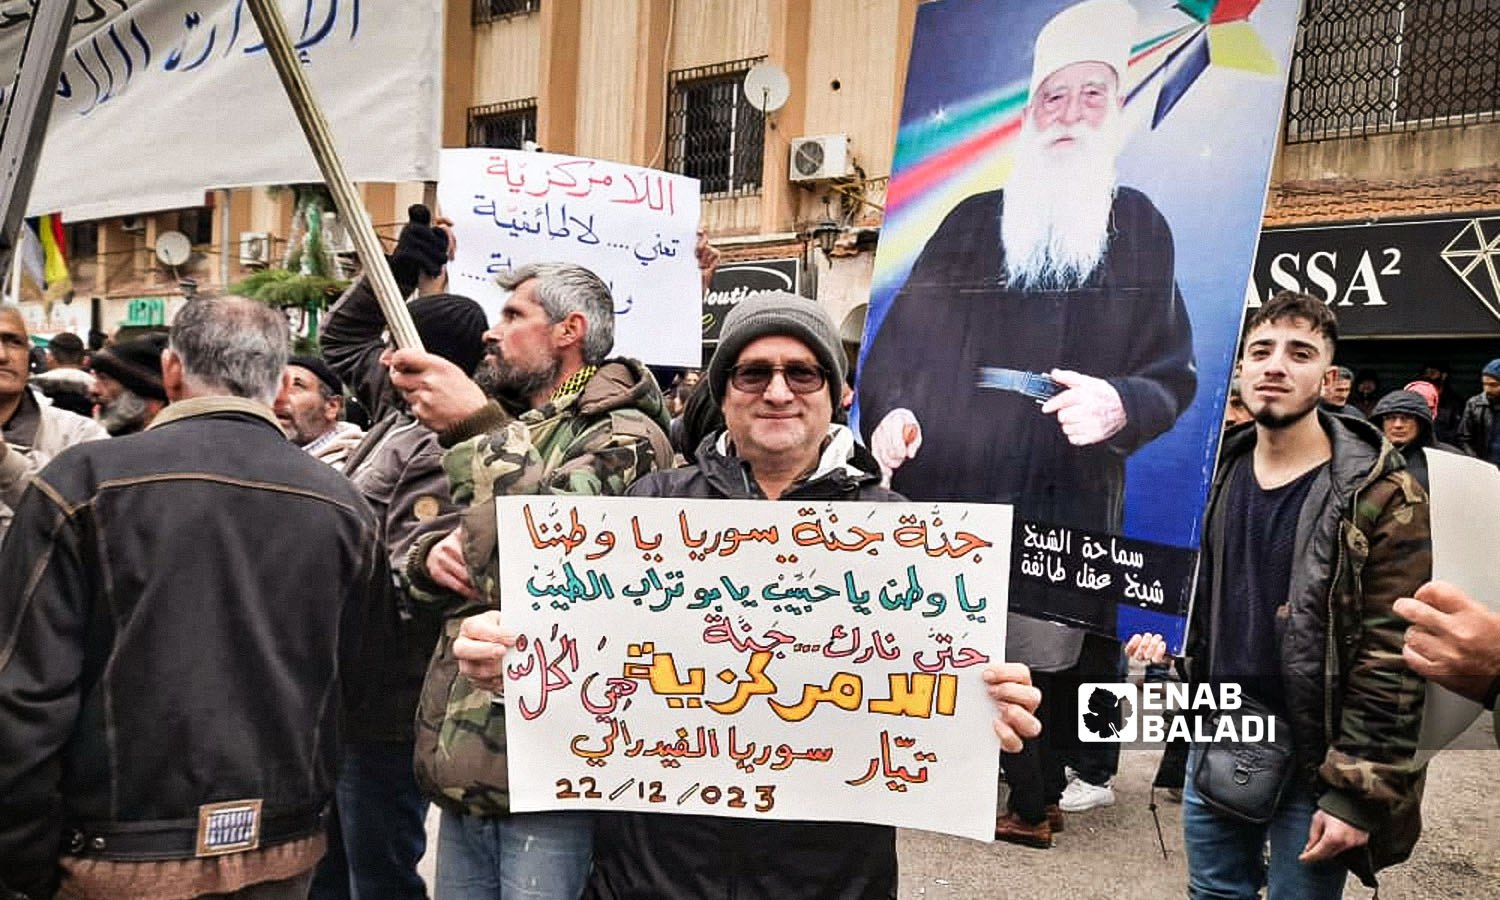 A picture of the Druze spiritual leader, Sheikh Hamoud al-Hinnawi, a supporter of the peaceful movement in As-Suwayda, is raised by demonstrators demanding political change in Syria and the departure of Bashar al-Assad - December 22, 2023 (Enab Baladi)